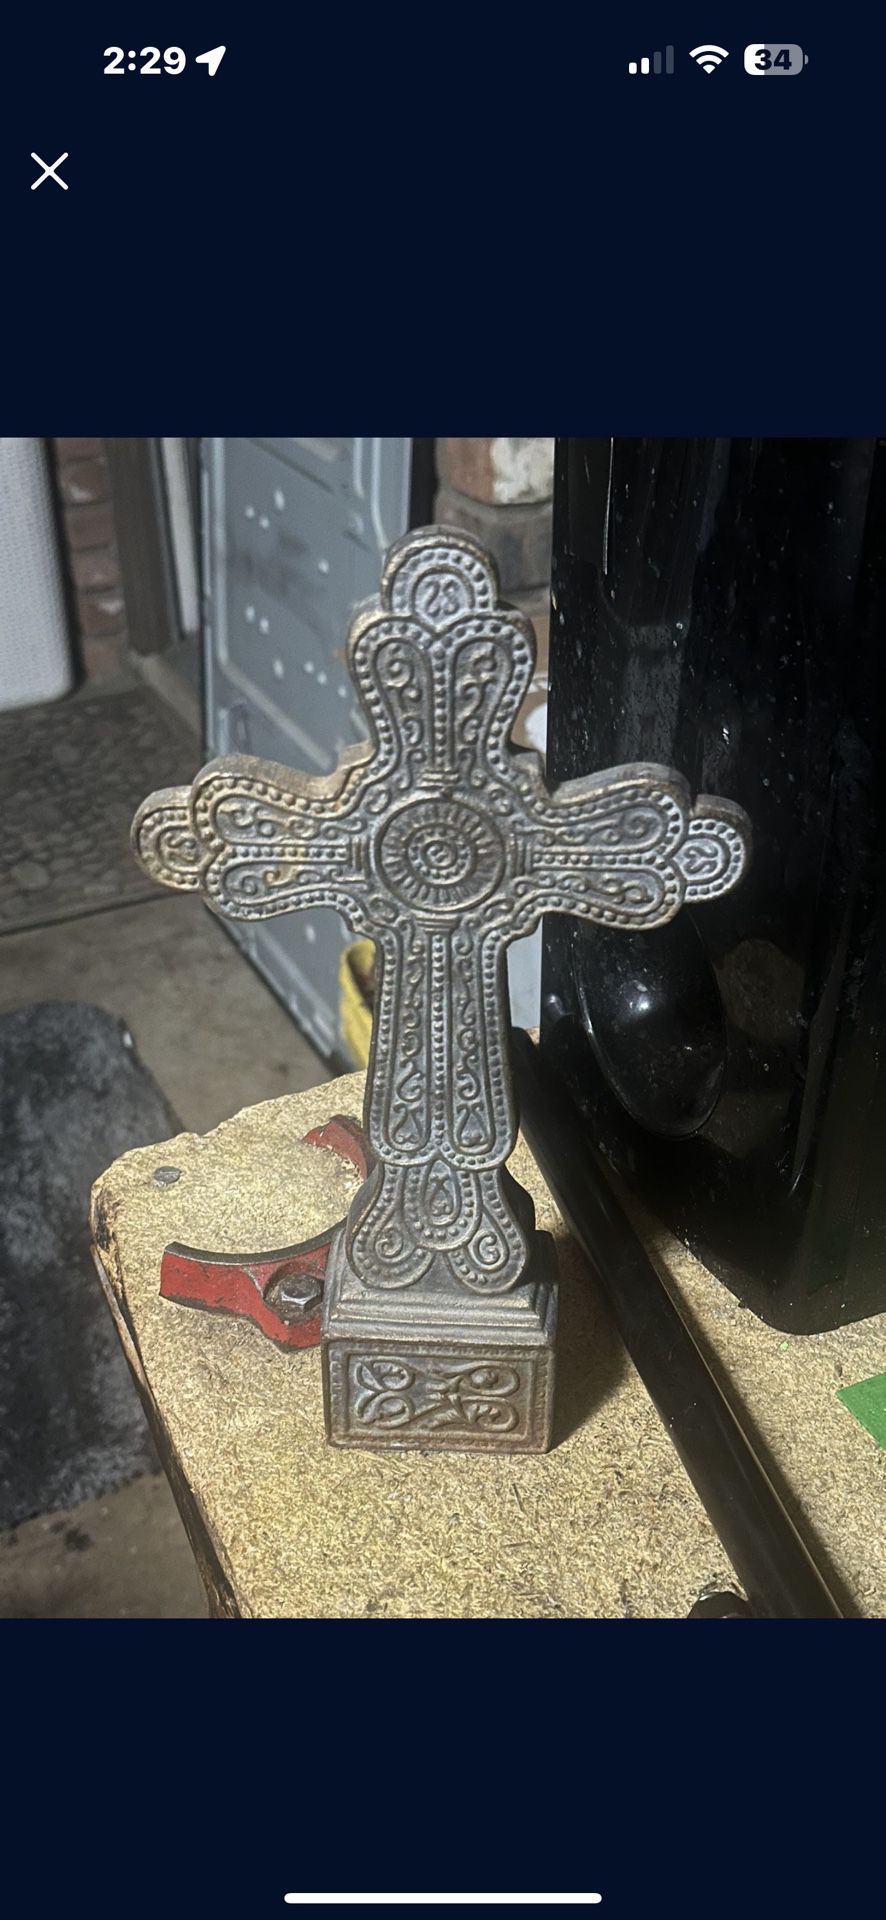 Green Metal Cross with Weighted Base